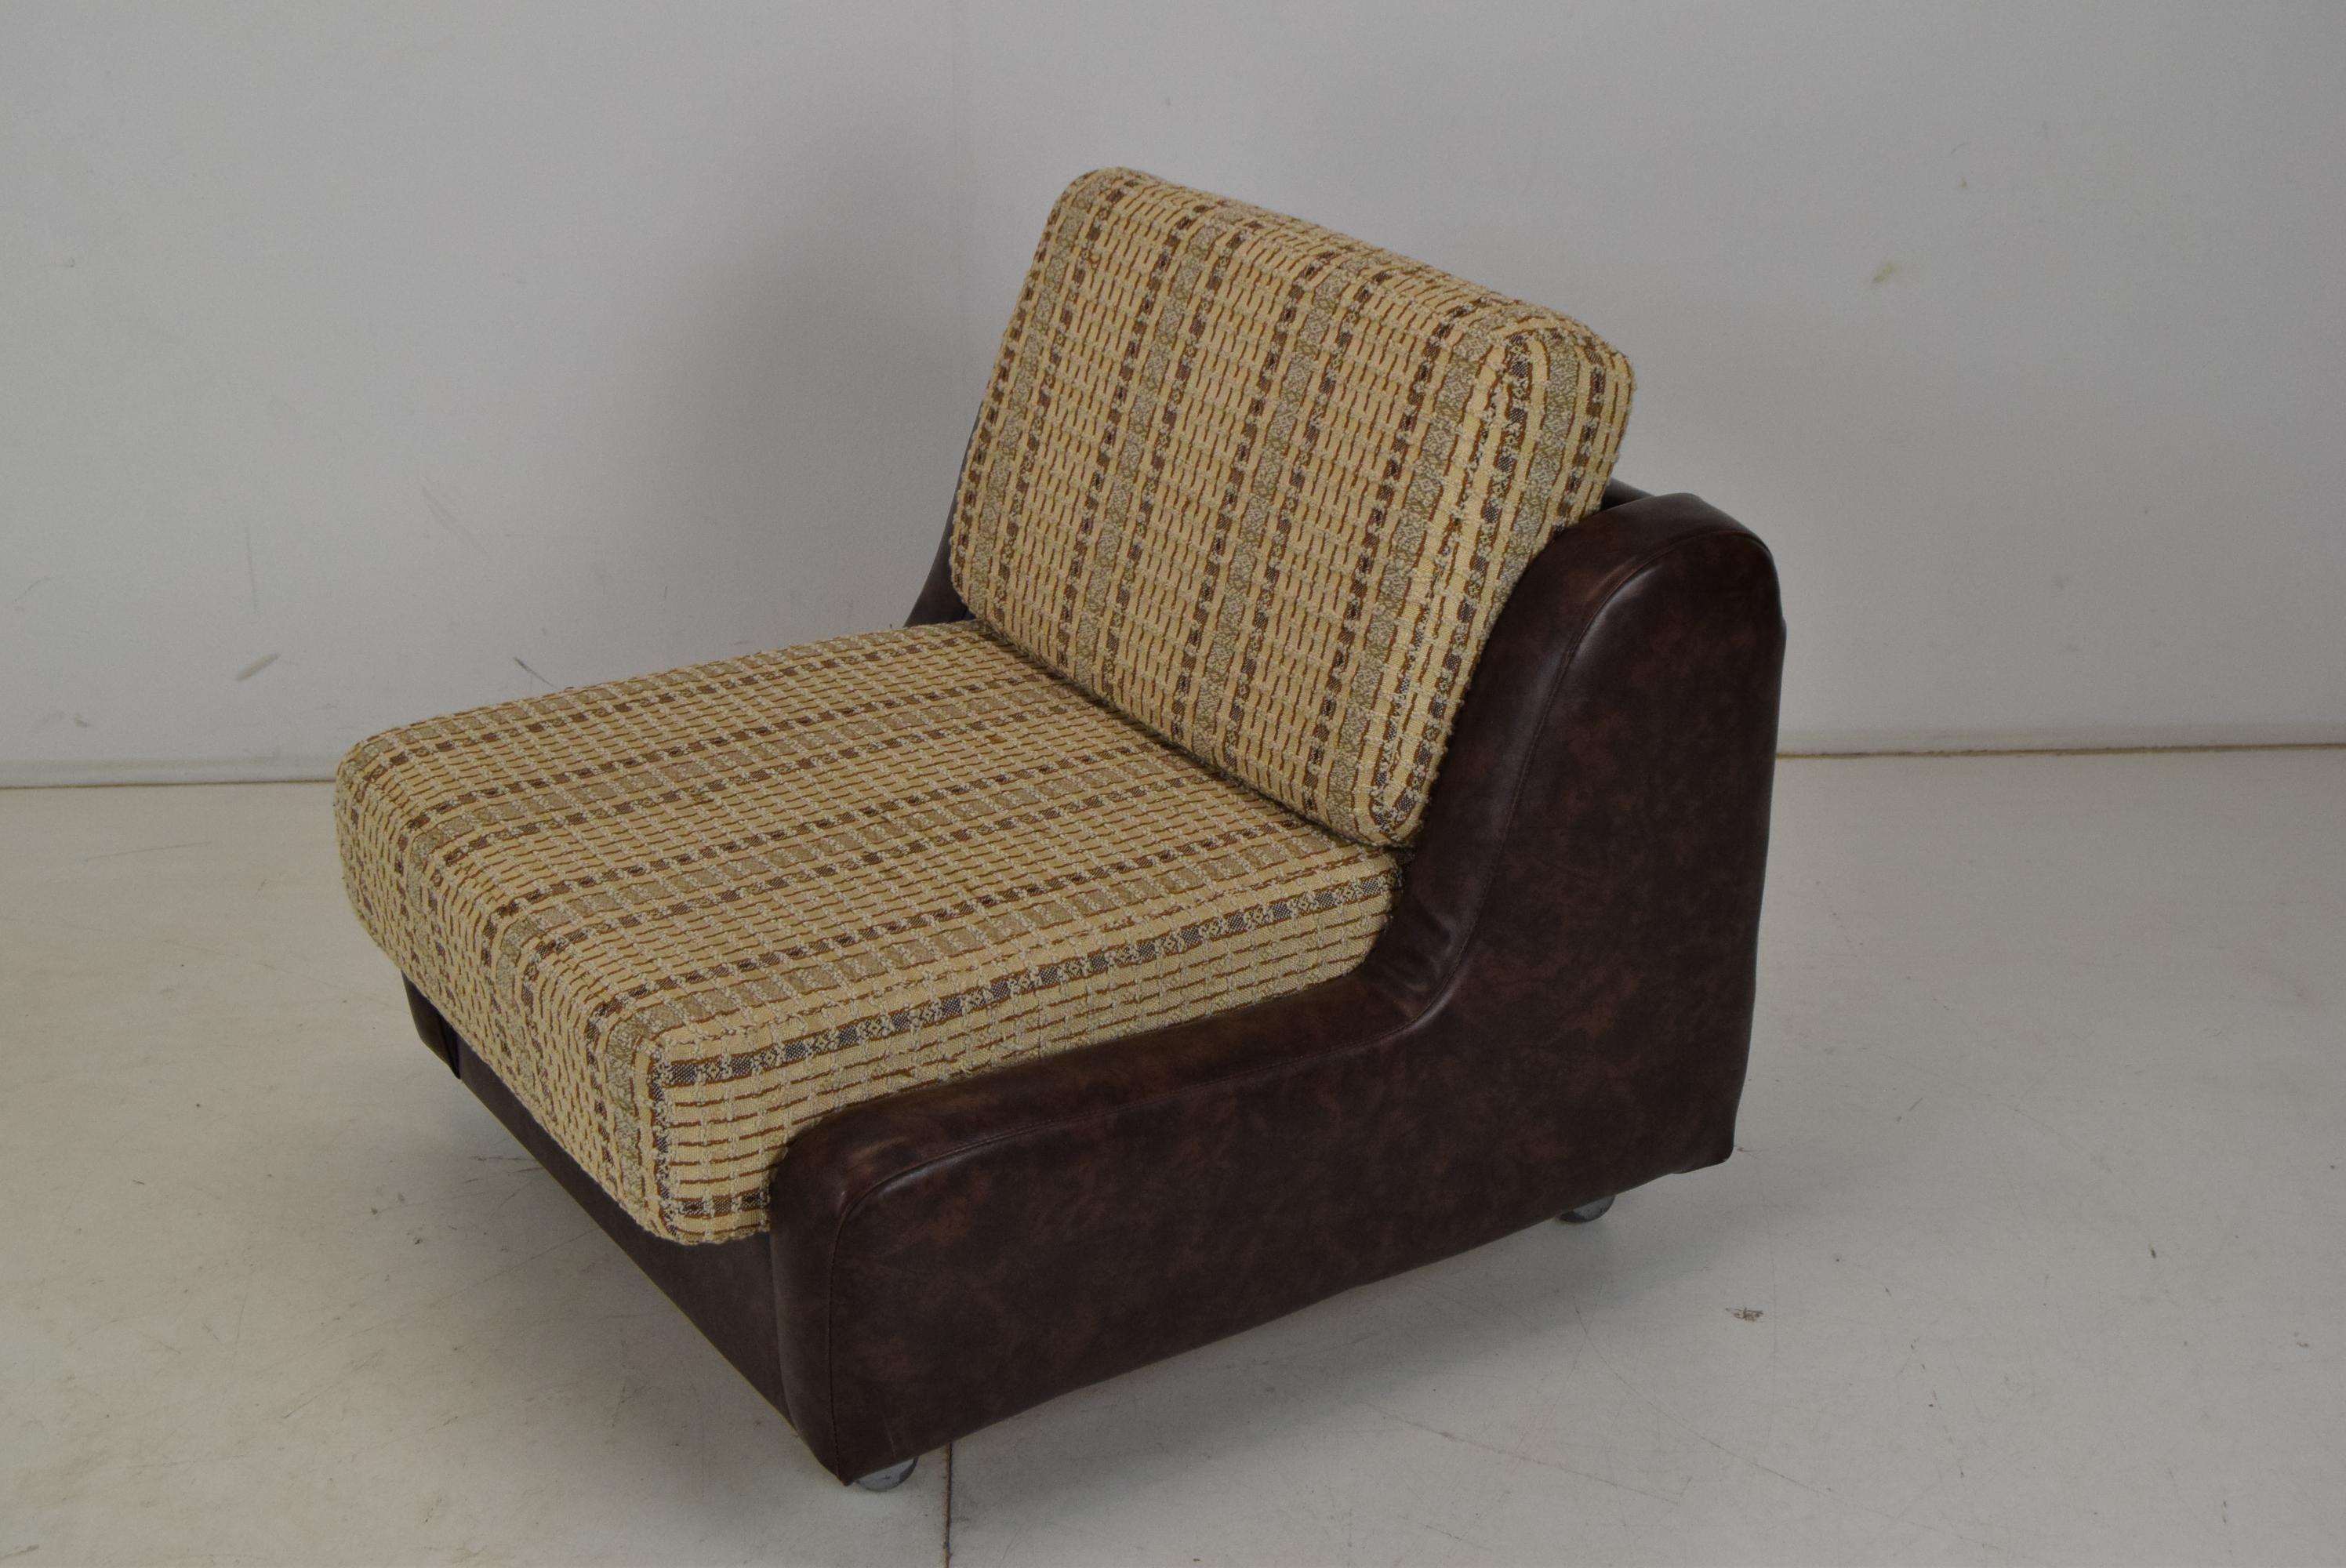 Made in Czechoslovakia.
Made of fabric, Leatherette.
Cushions show signs of use.
Two pieces in stock
Original condition.